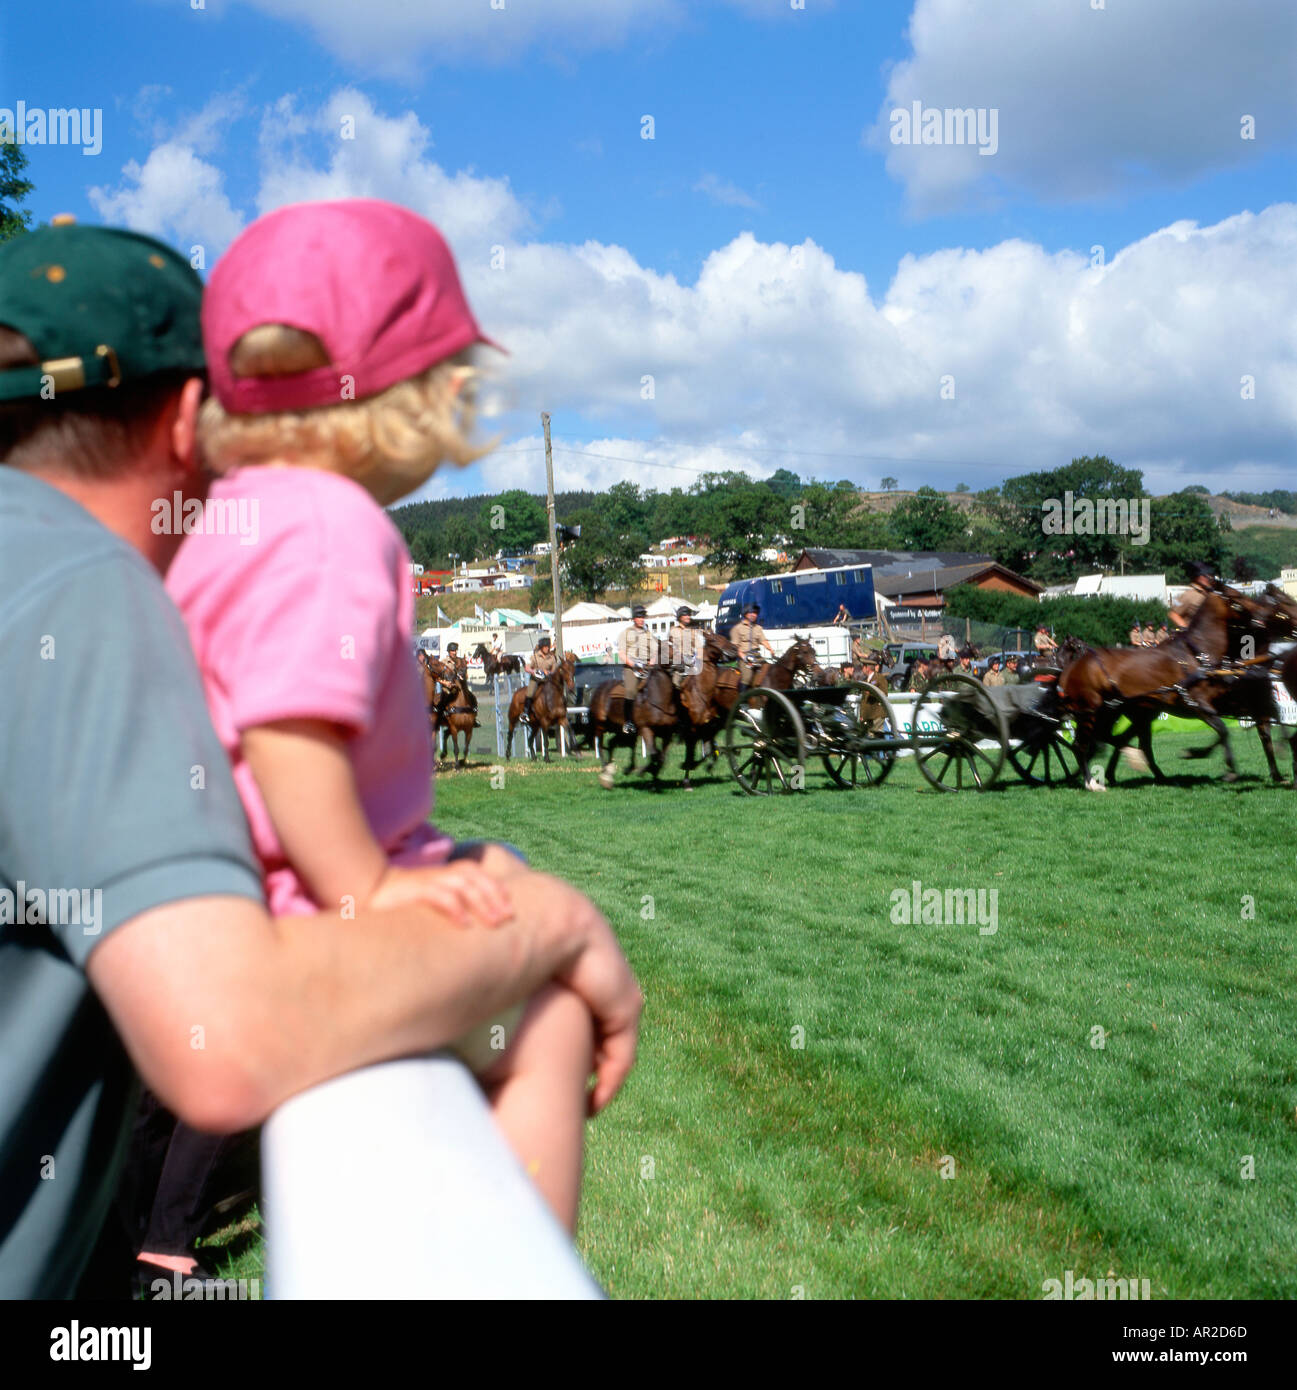 A father and child watching The Kings Troop Royal Horse Artillery at the Royal Welsh Agricultural Show in Builth Wells Powys Wa Stock Photo